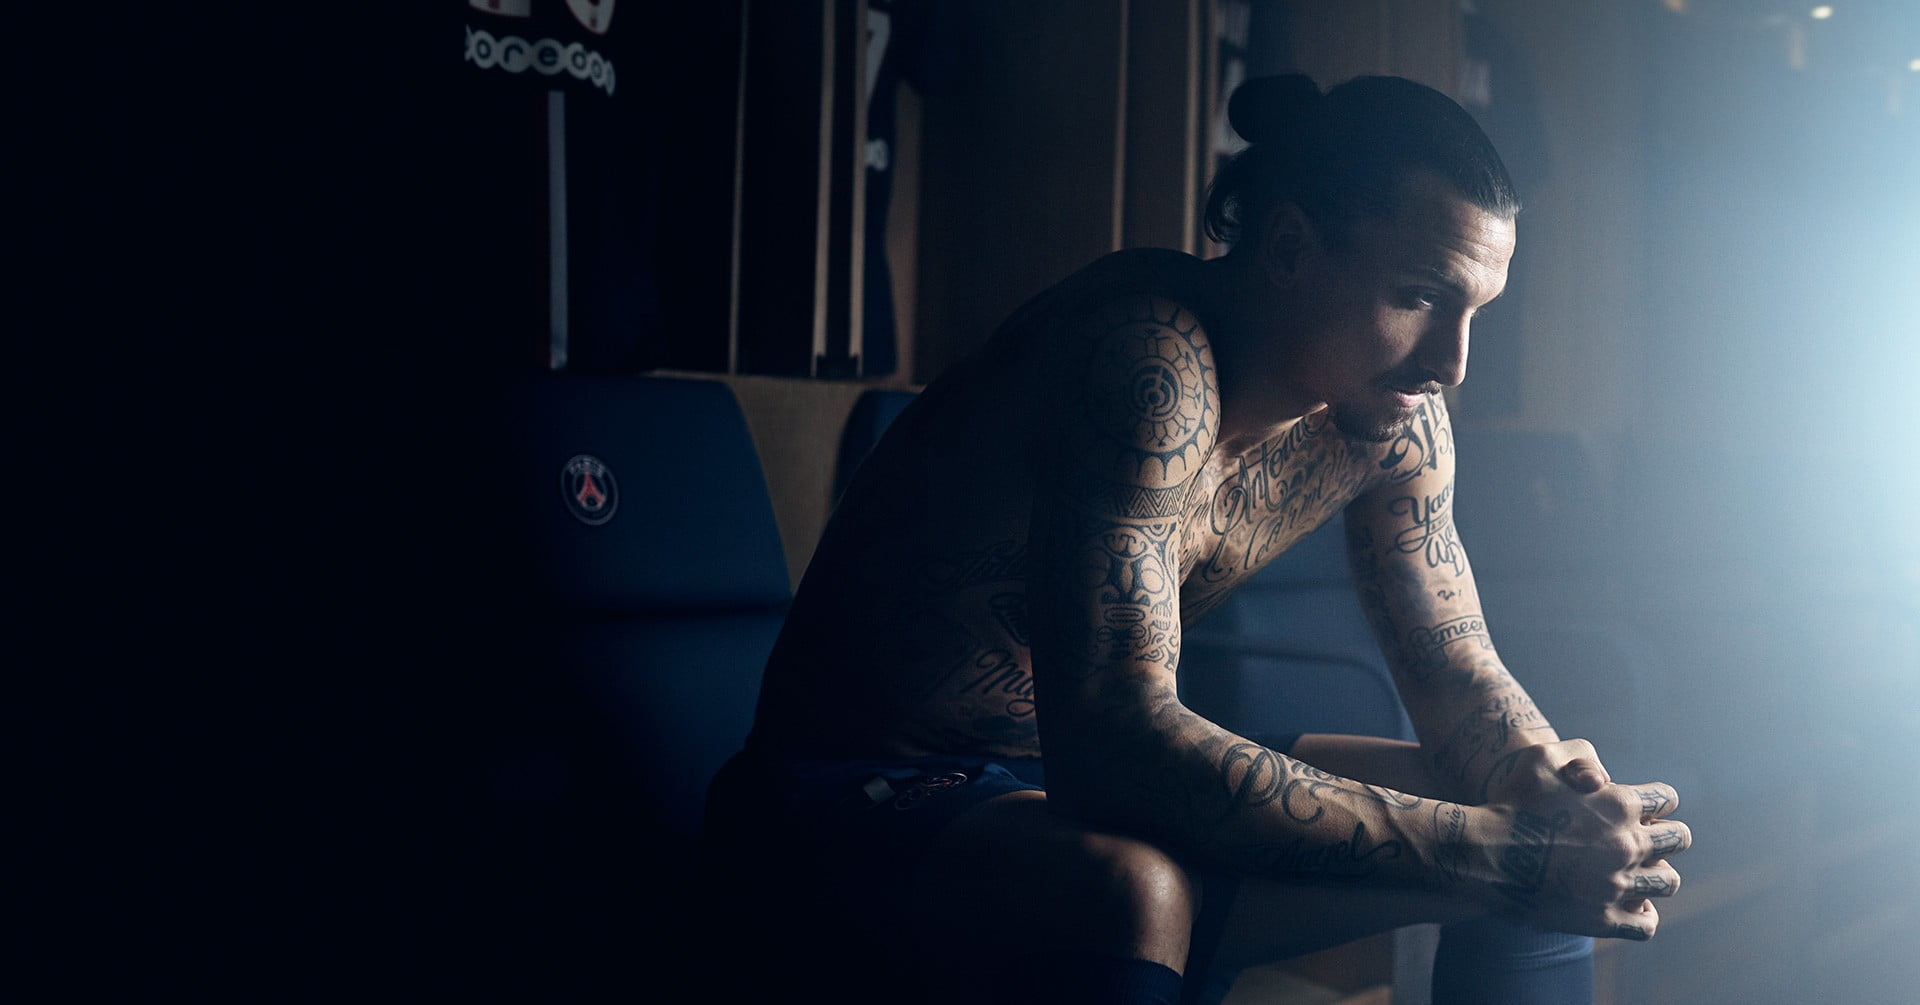 Story Behind Zlatan Ibrahimovic's Tattoos That Disappeared